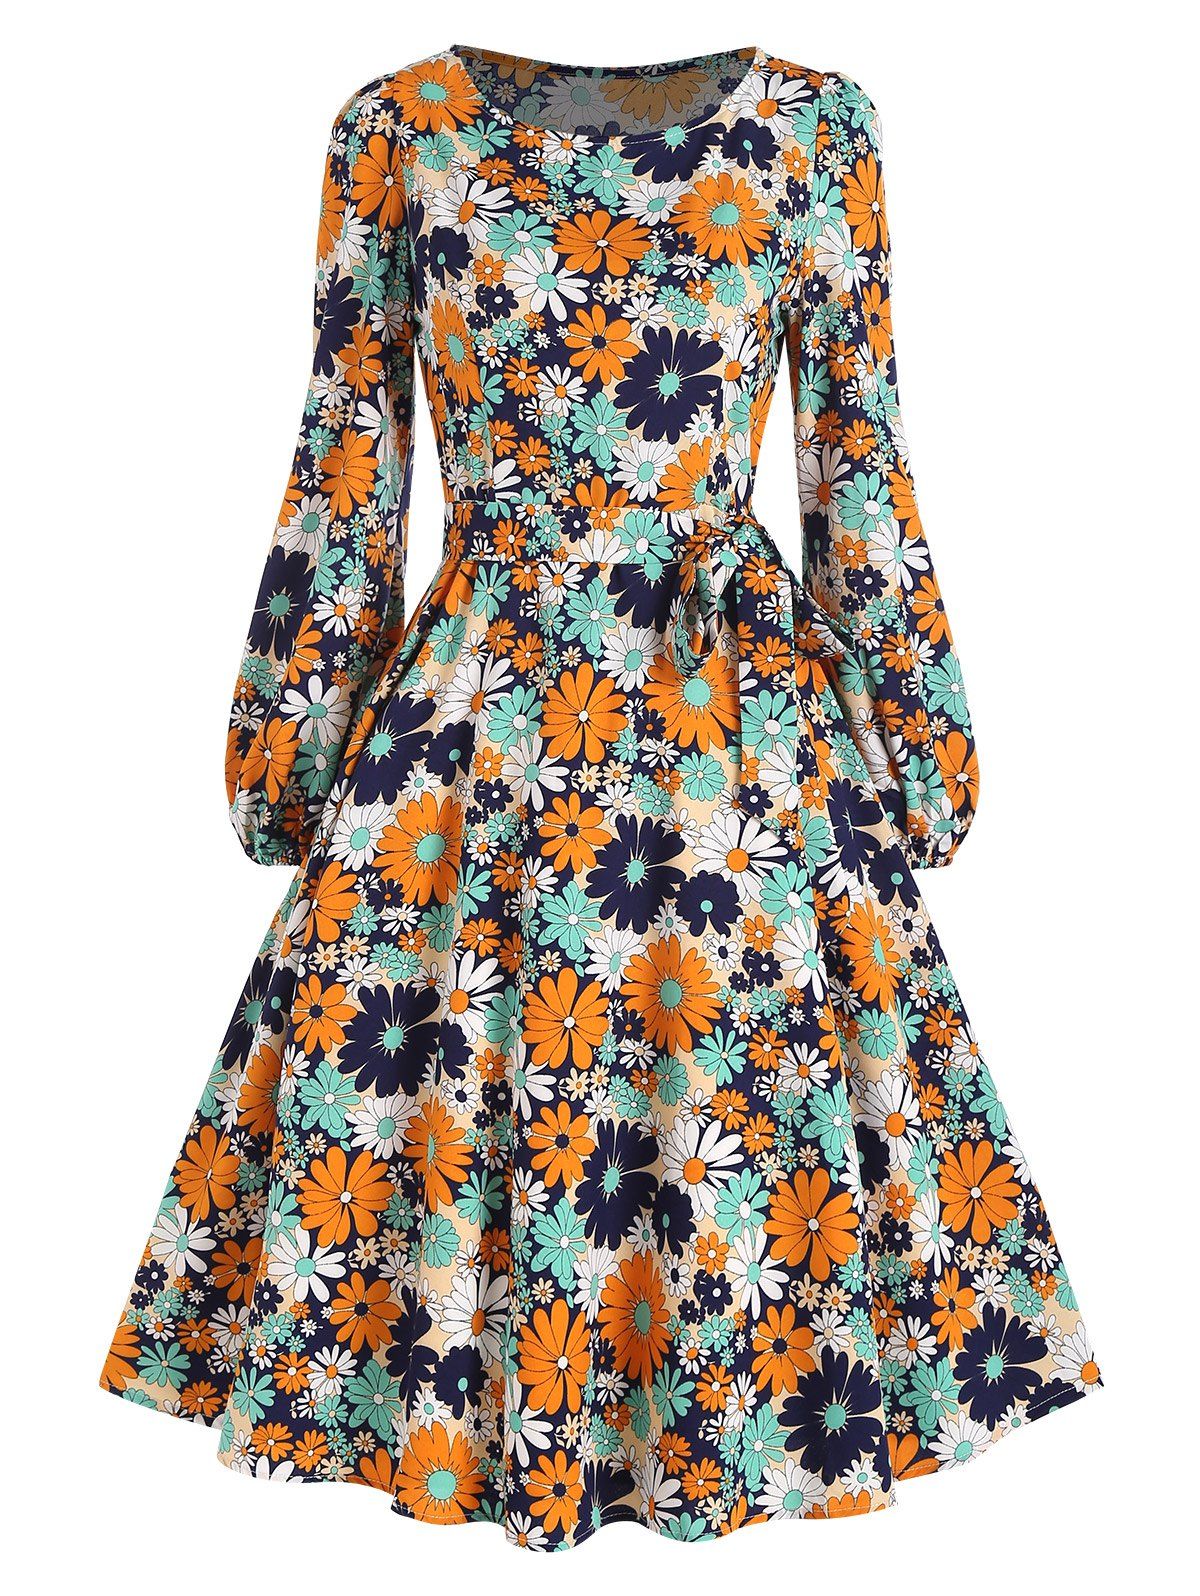 Belted Long Sleeve Floral Swing Dress - multicolor M